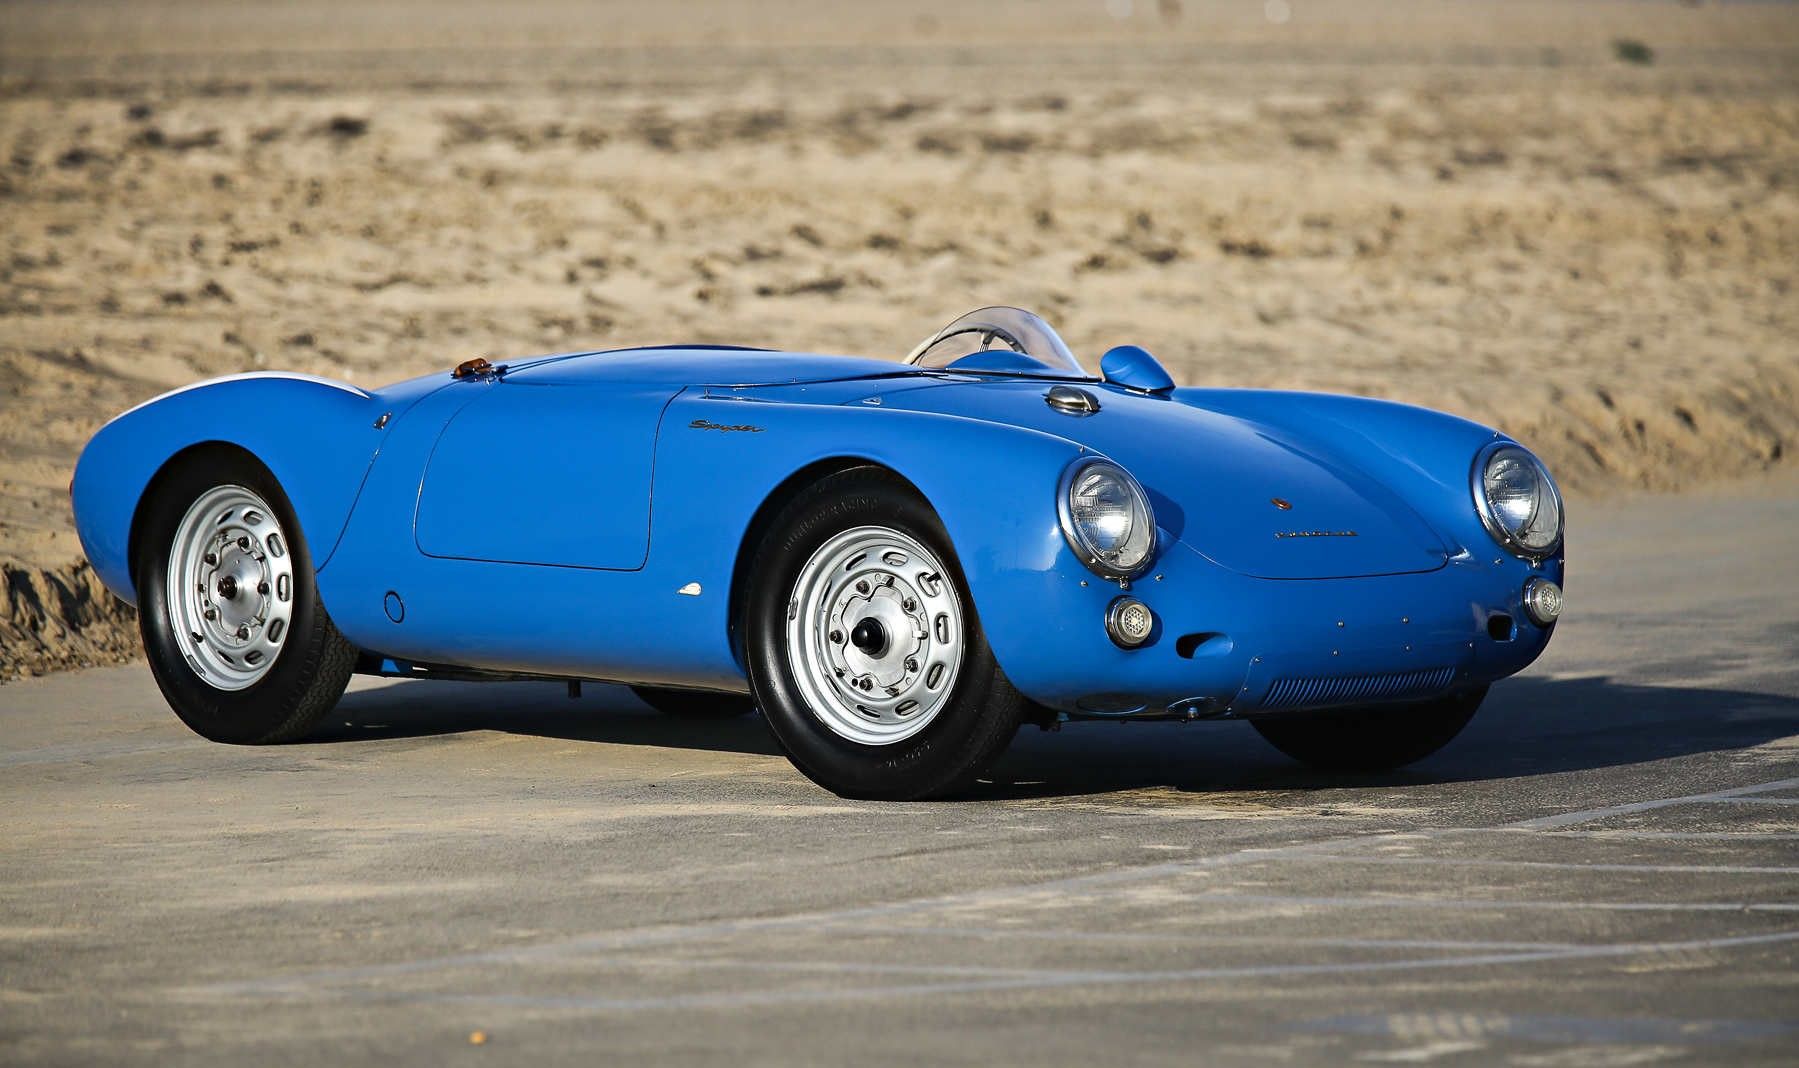 the 1955 Porsche 550 Spyder Jerry Seinfeld sold for $5 million in 2016